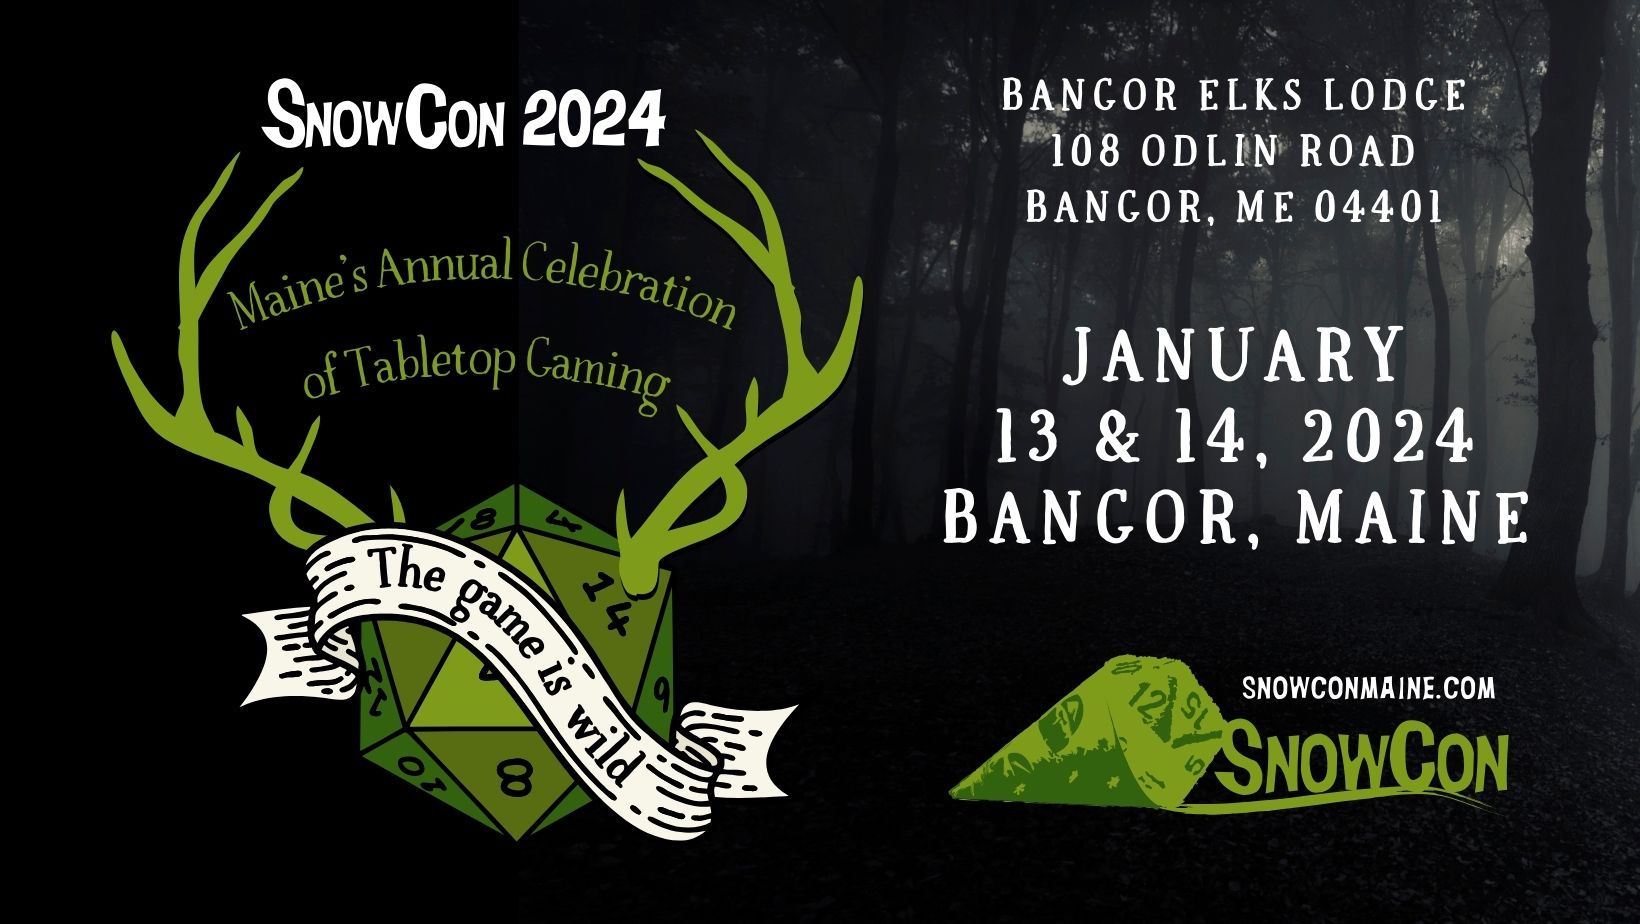 decorative image of d20with antlers and a banner reading "The Game is Wild" SnowCon 2024 Maine's Annual Celebration of Tabletop Gaming